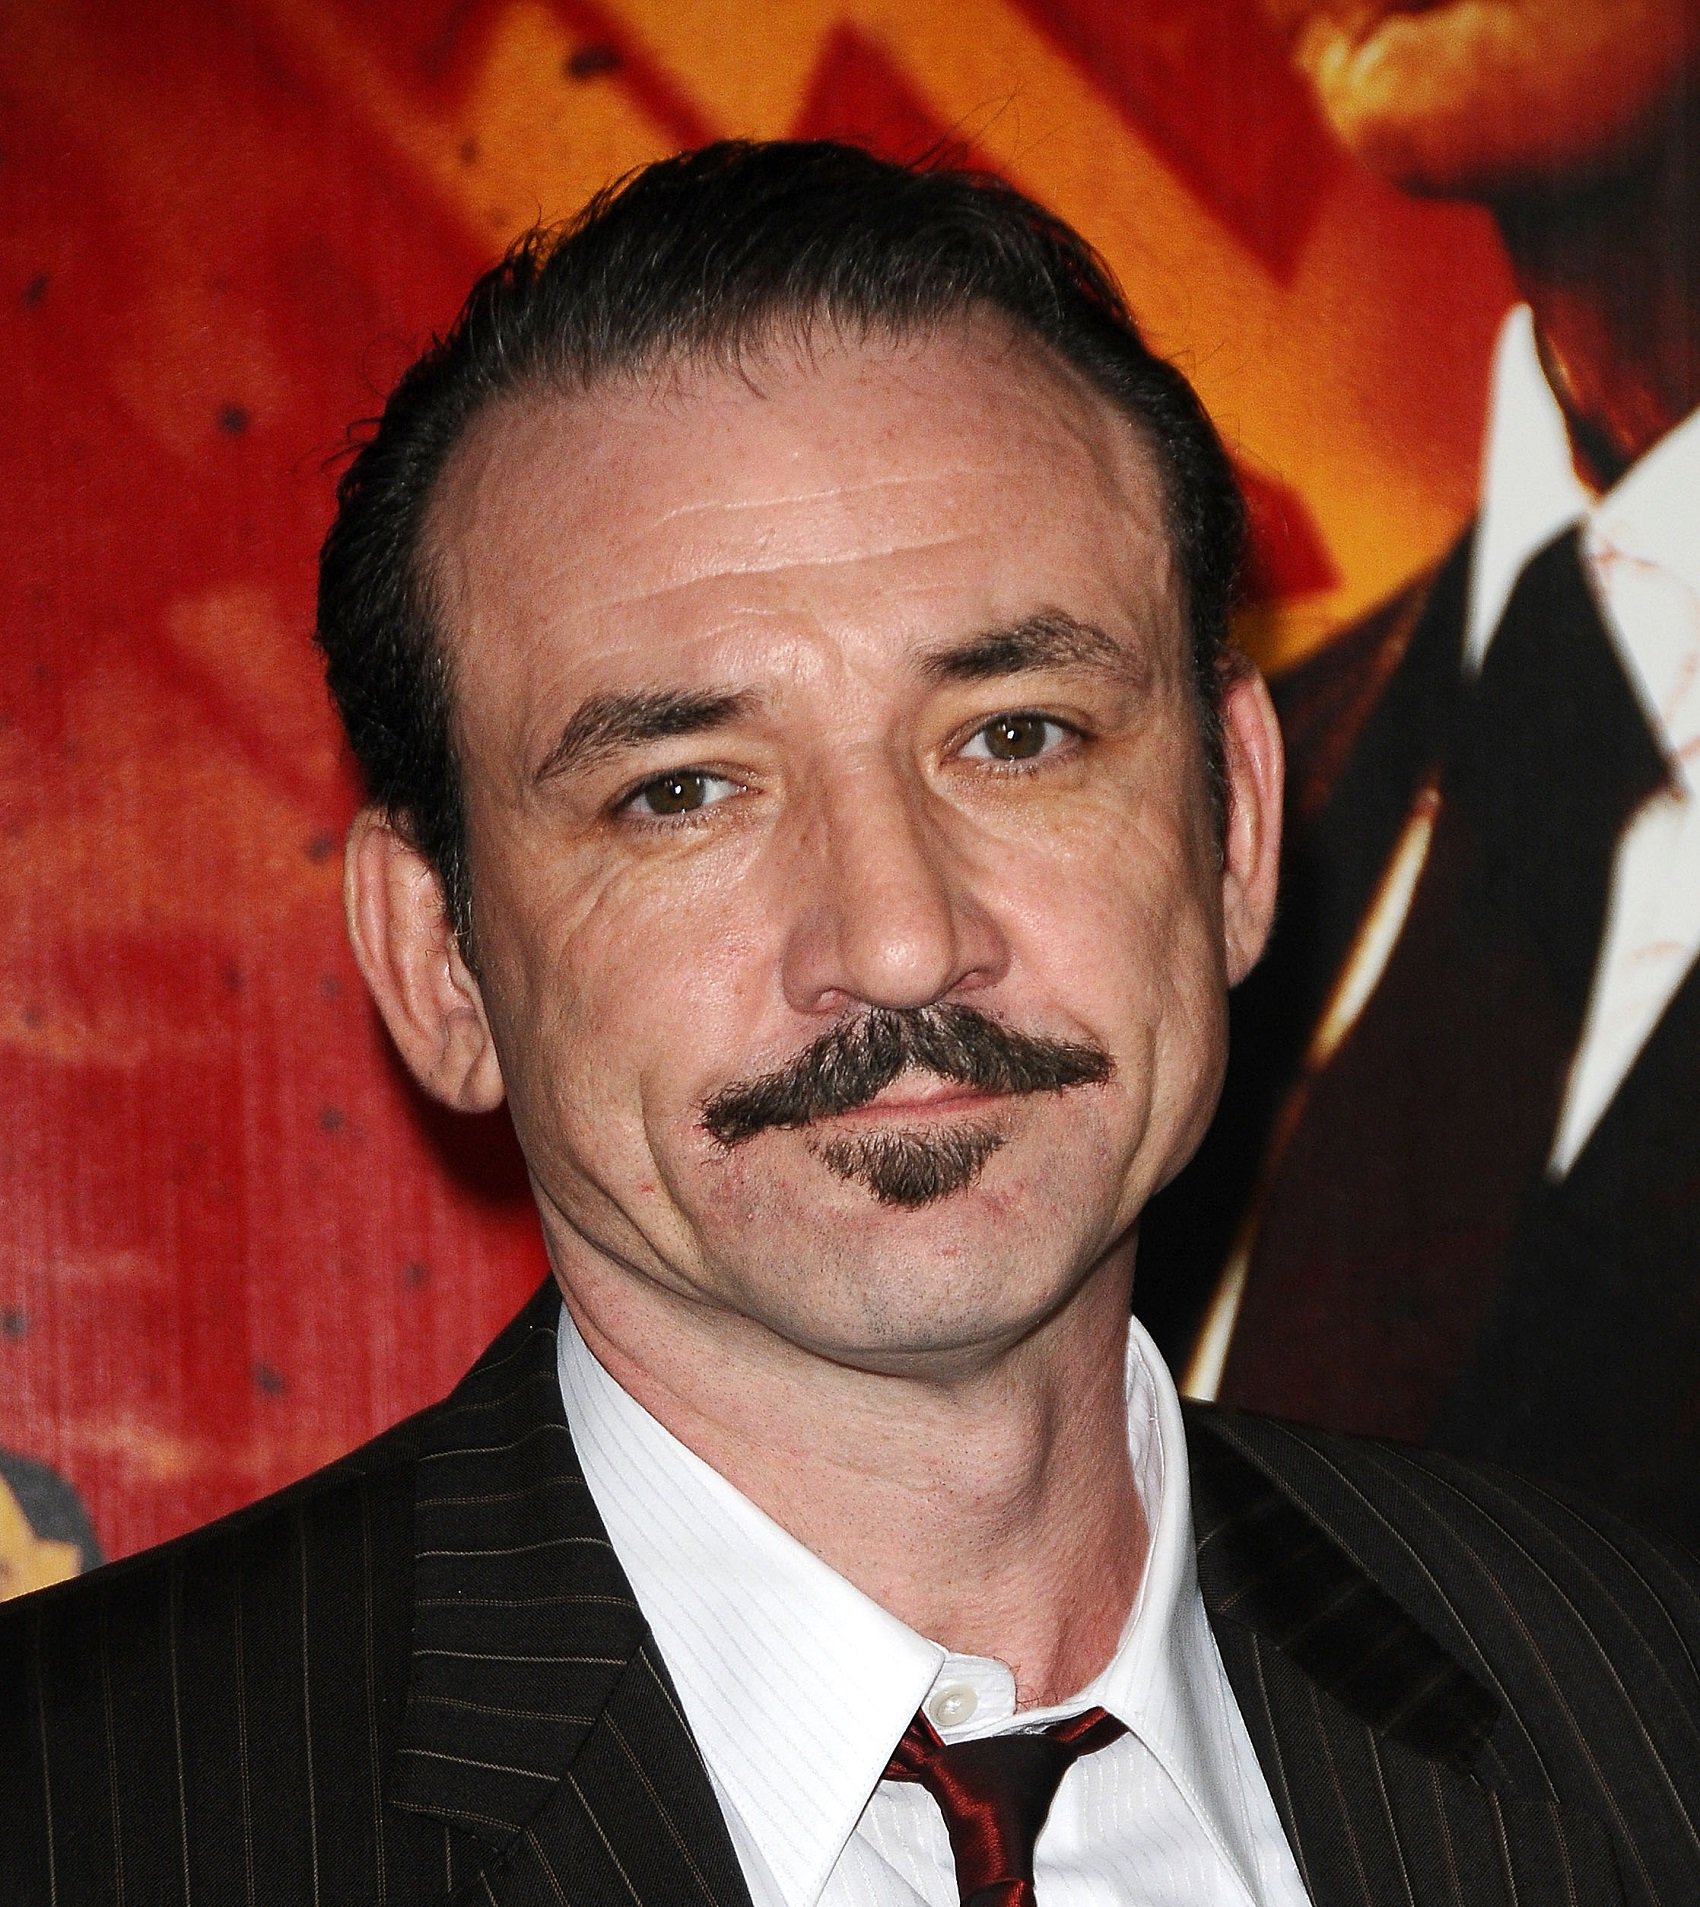 Ritchie Coster attends the premiere of 'Luck' in 2012. Coster played Samantha Jones' one-night stand, Caleb MacDougal in 'Sex and the City'